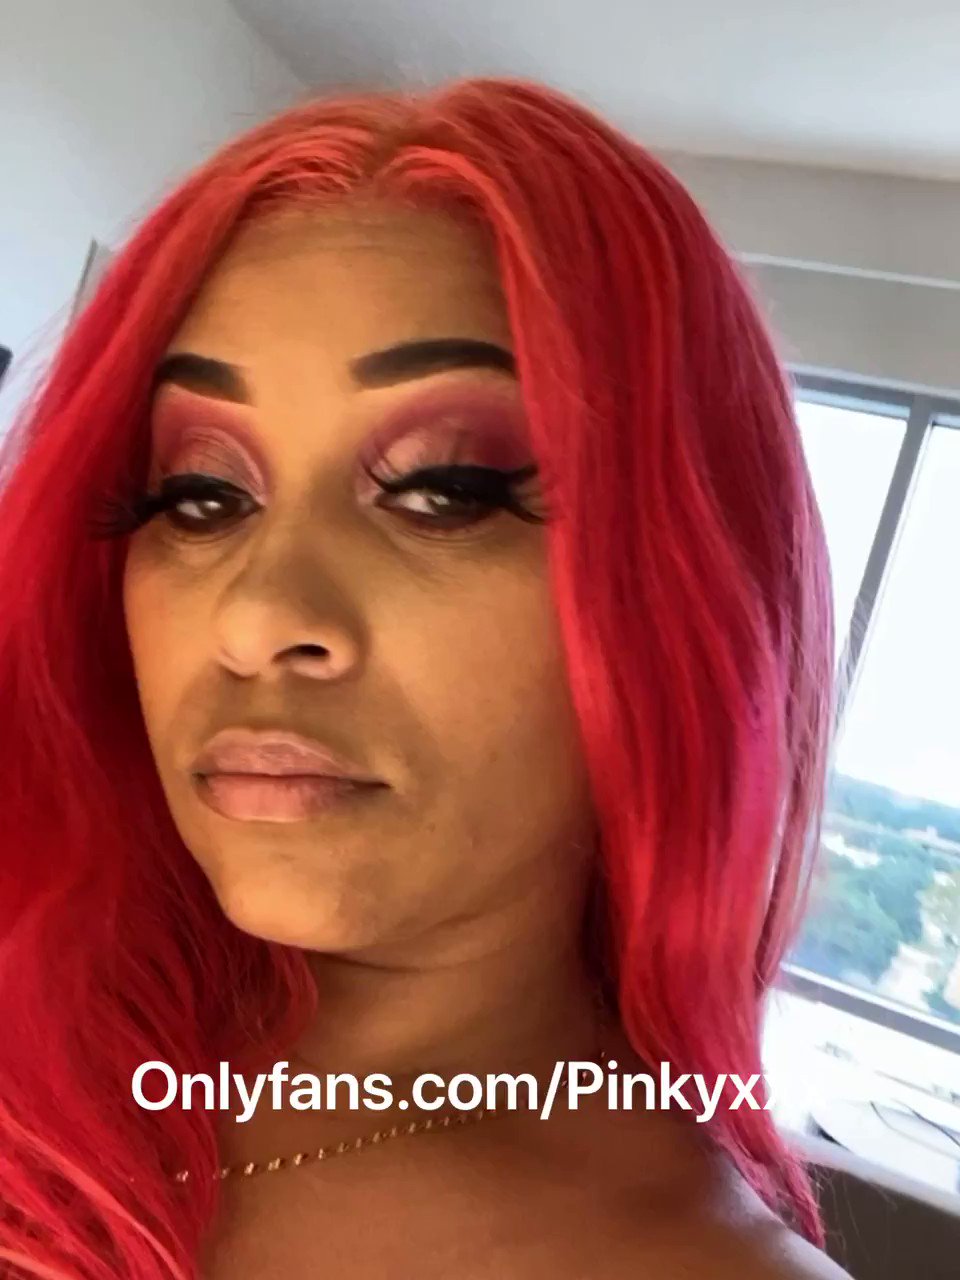 Onlyfans pinky xxx The Official